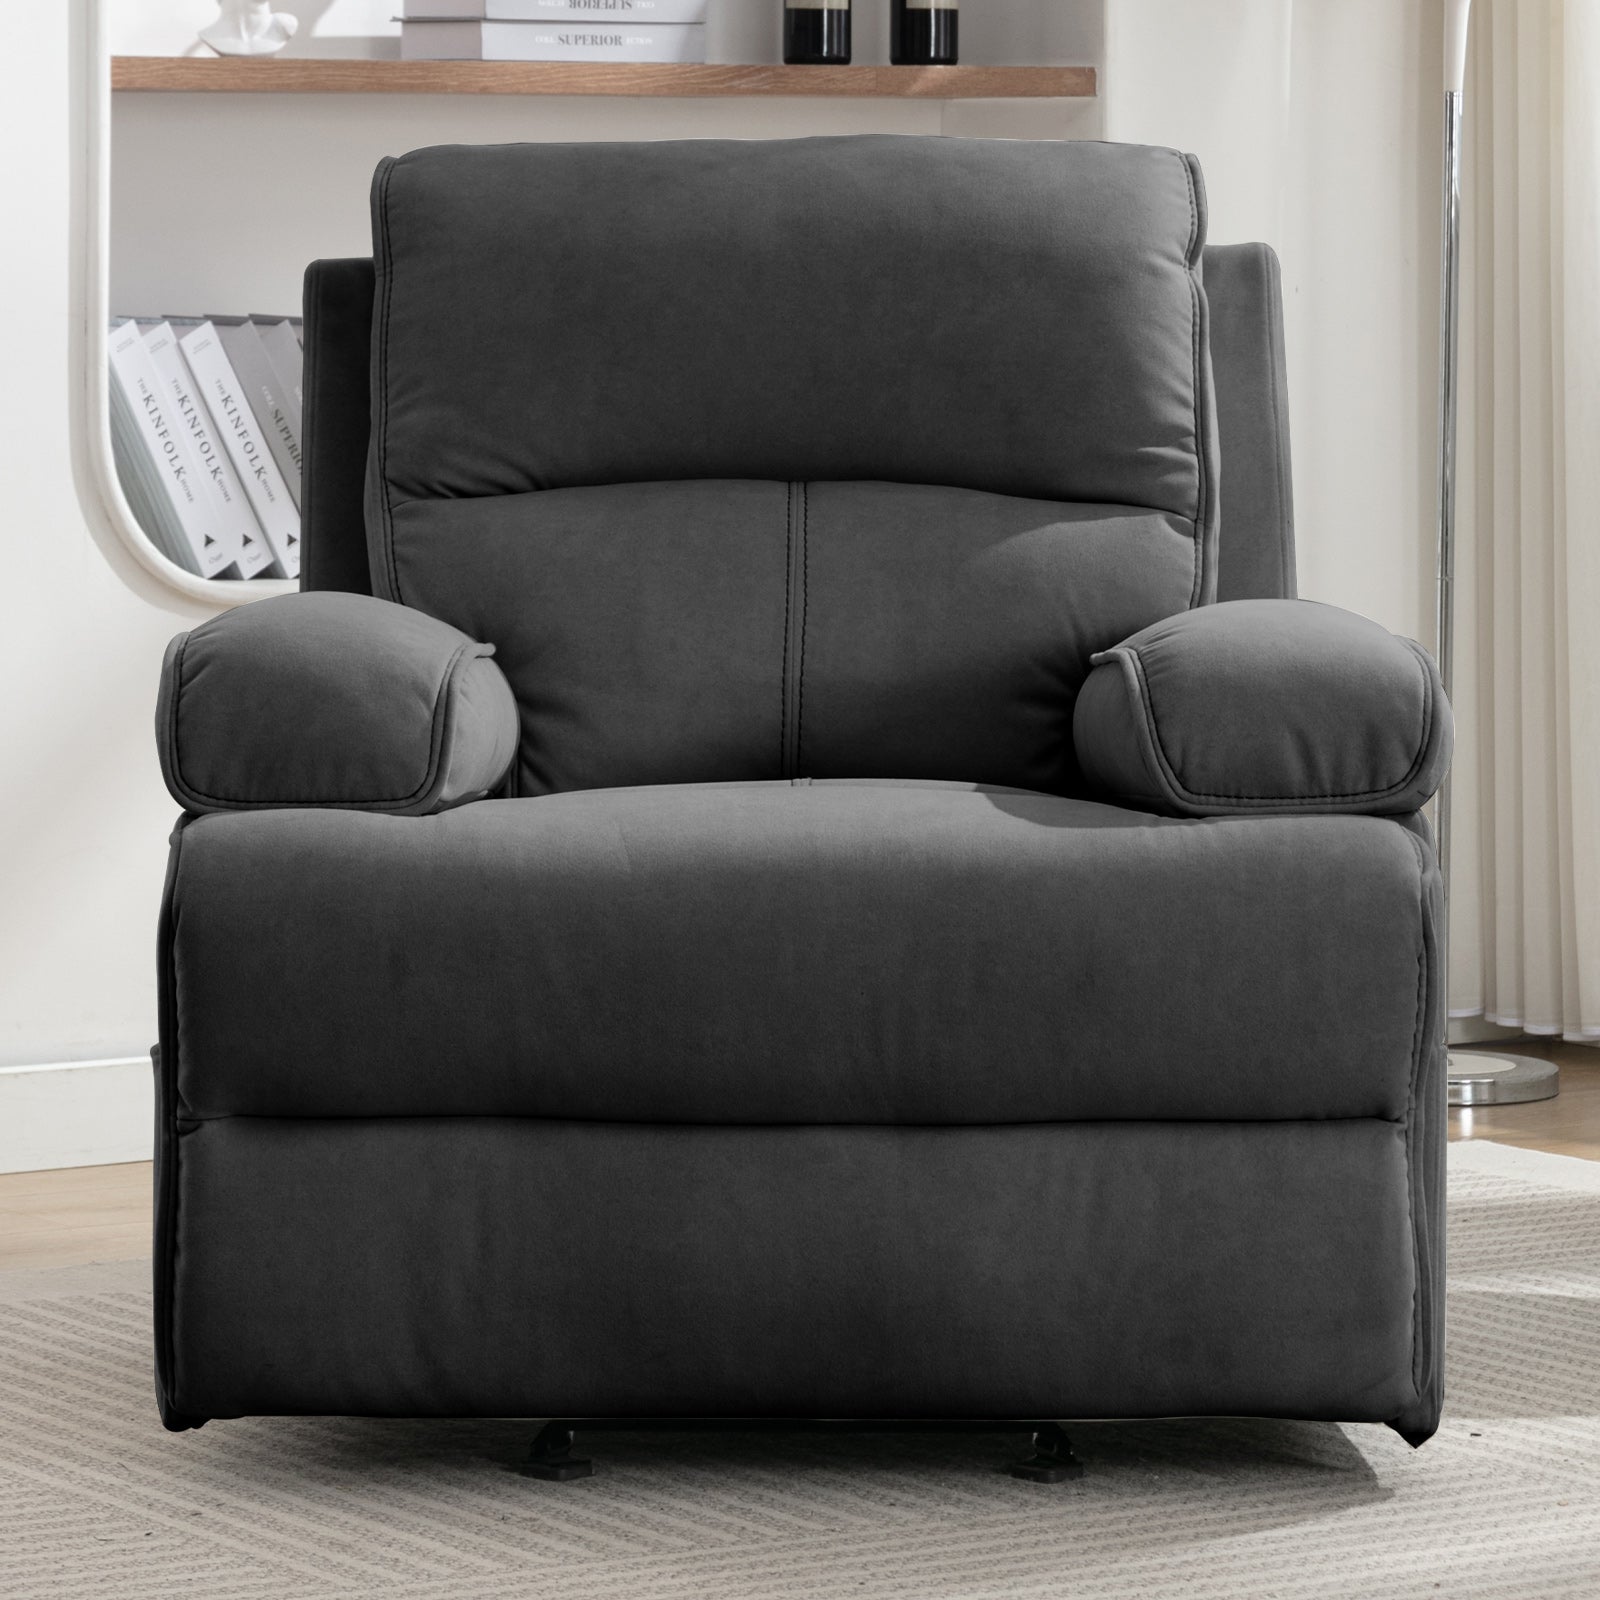 Mjkone Recliner Chair for Adults, Baby Velour Fabric Reclining Sofa Chair with Heat Vibration Function, Lazy Sofa Lift Chair, Oversized Glider Massage Chair for Living Room, Bedroom, Office